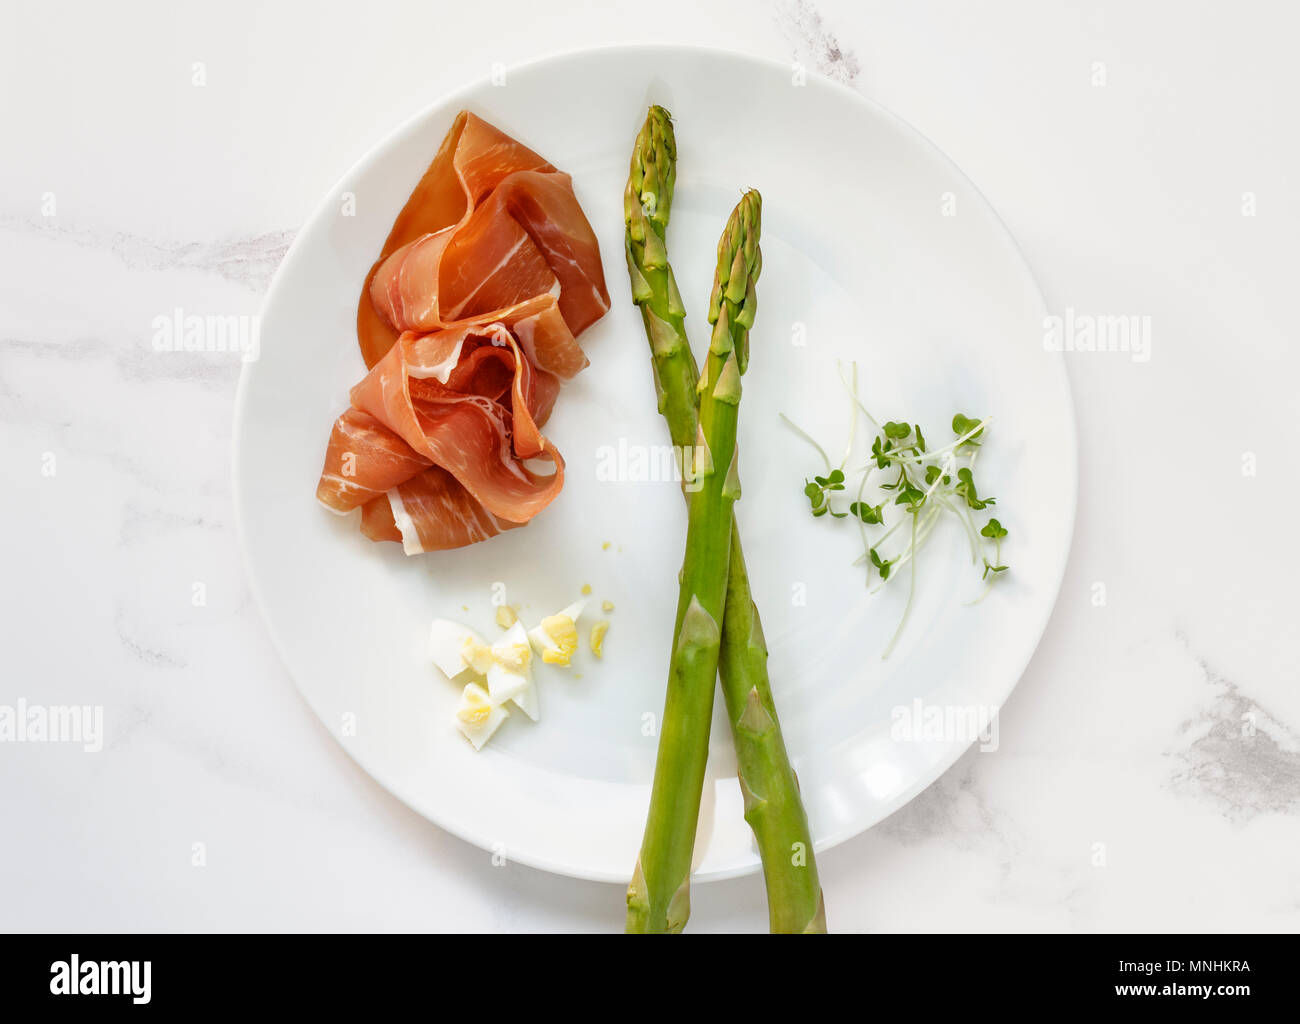 New Season Asparagus with Parma Ham ,Egg and Cress Stock Photo